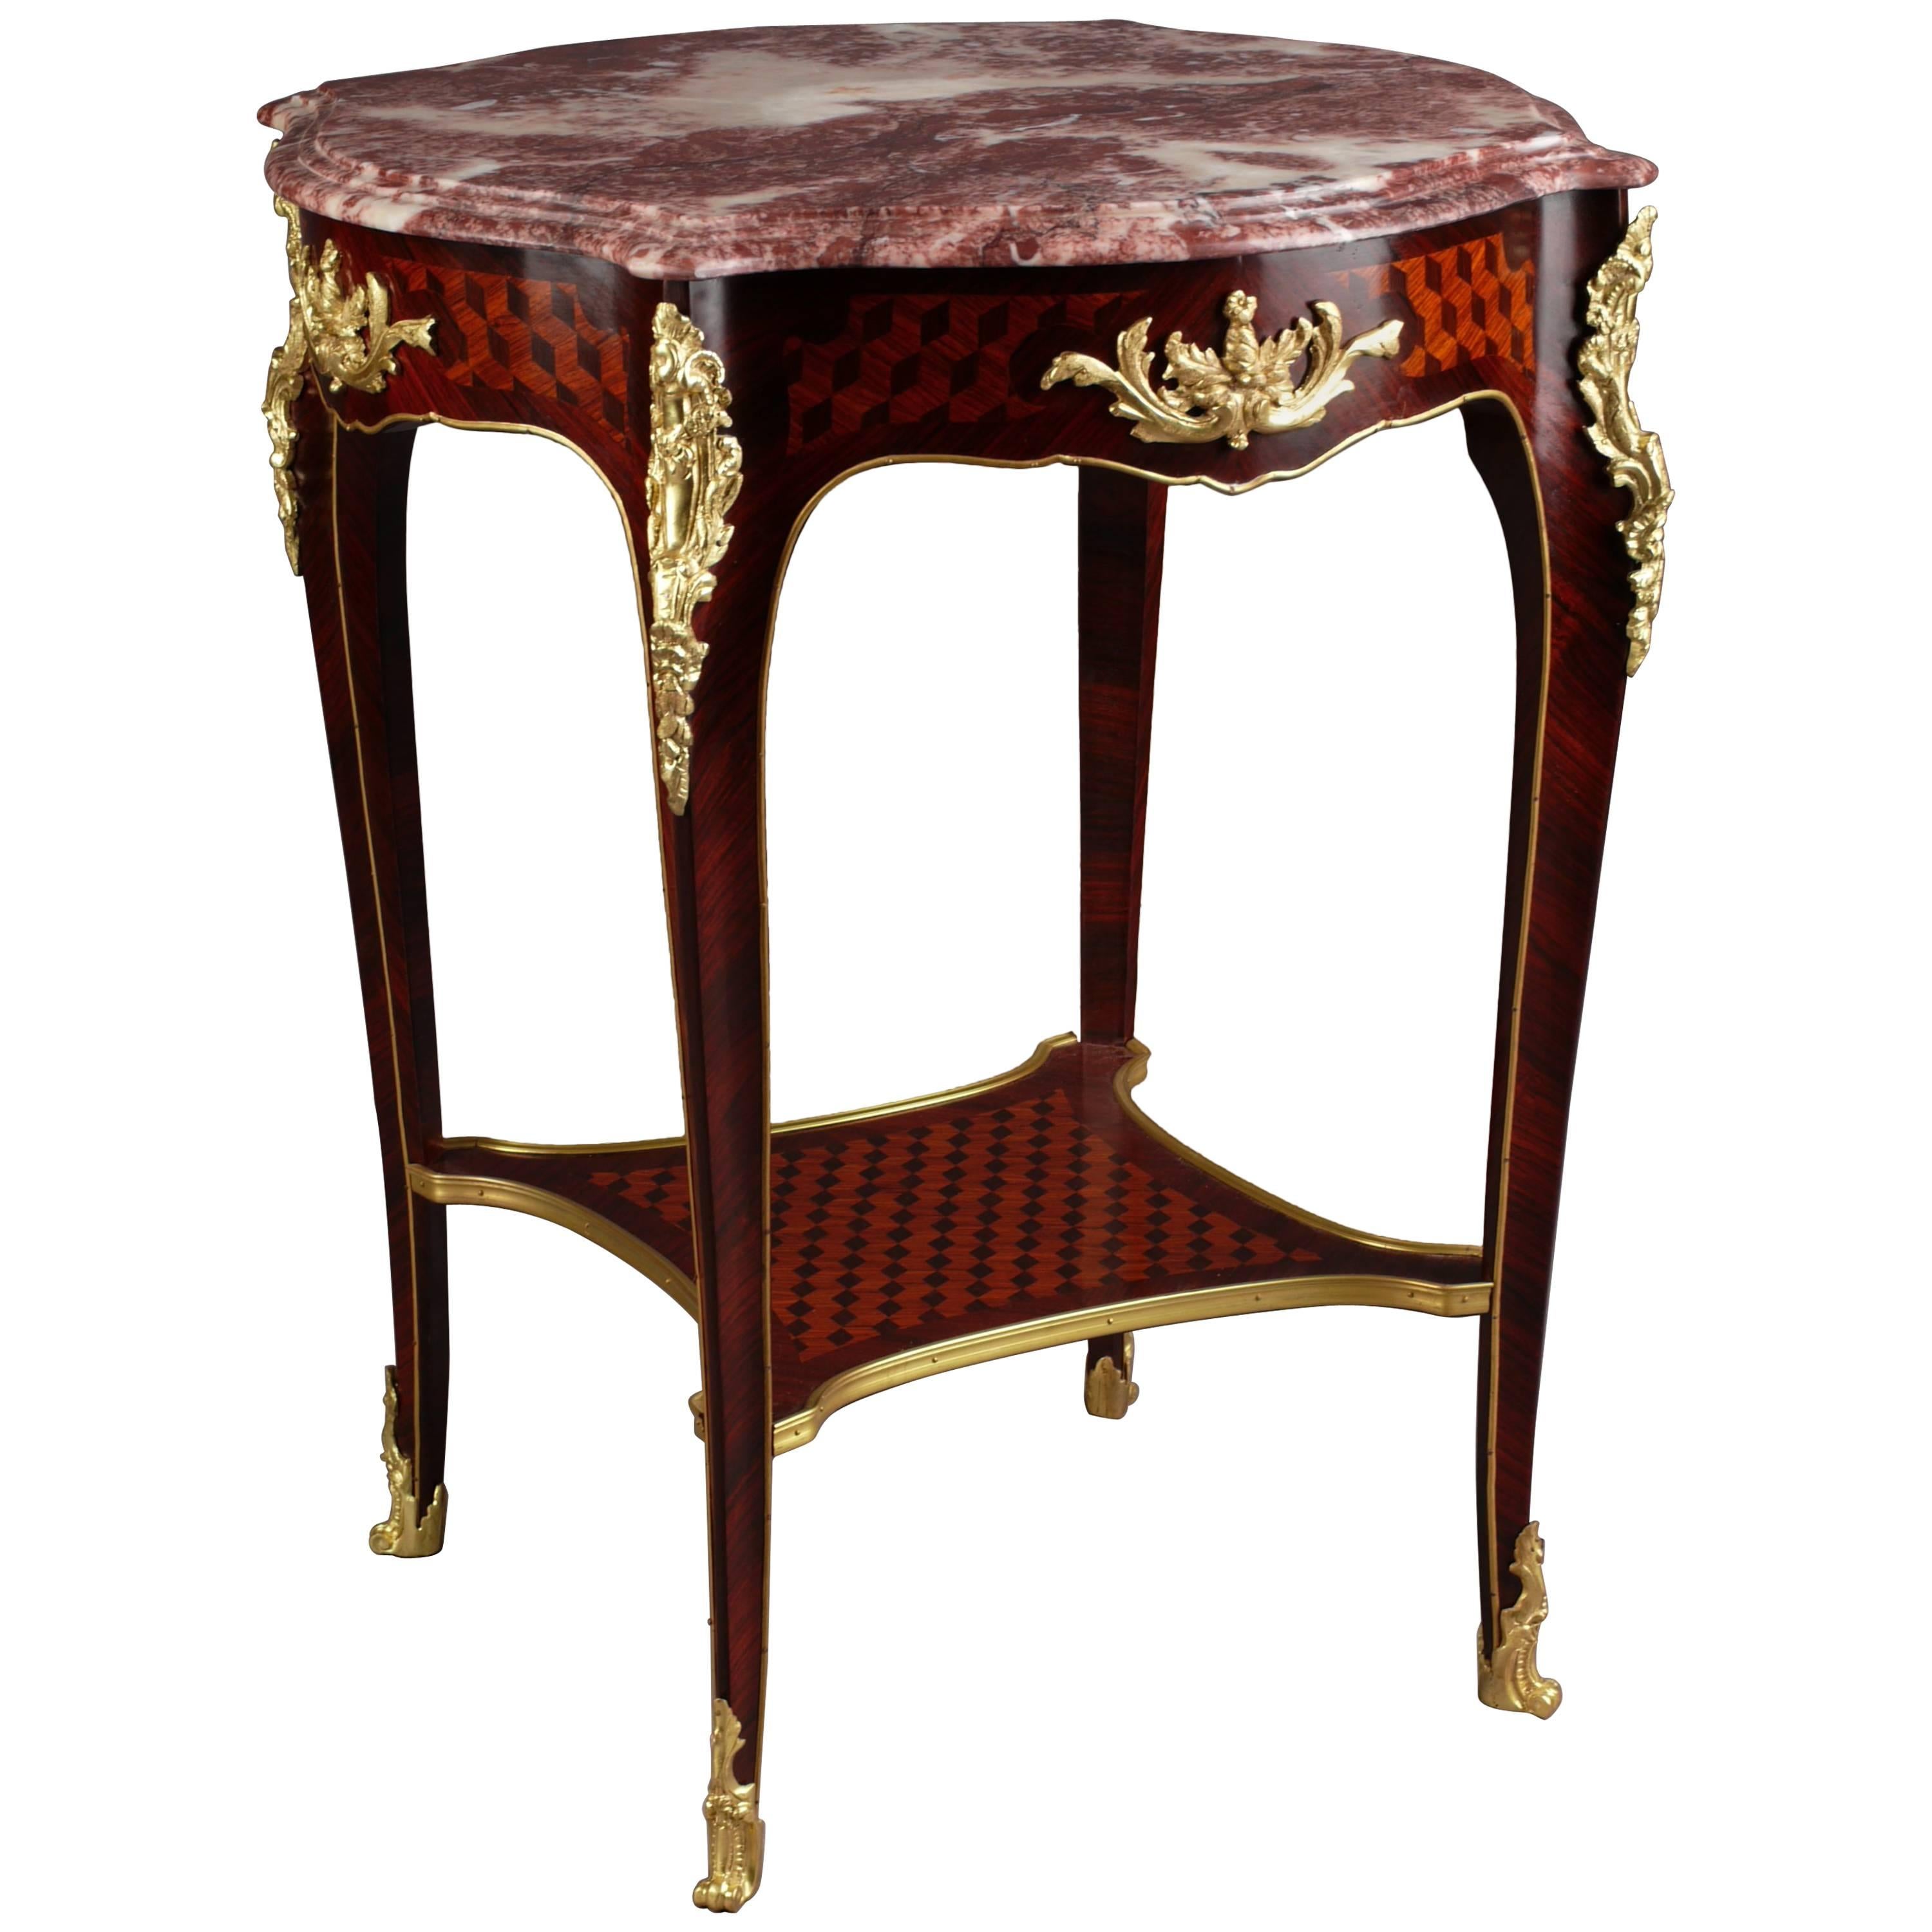 20th Century Exclusive Side Table in Louis Quinze Style Rosewood Veneer